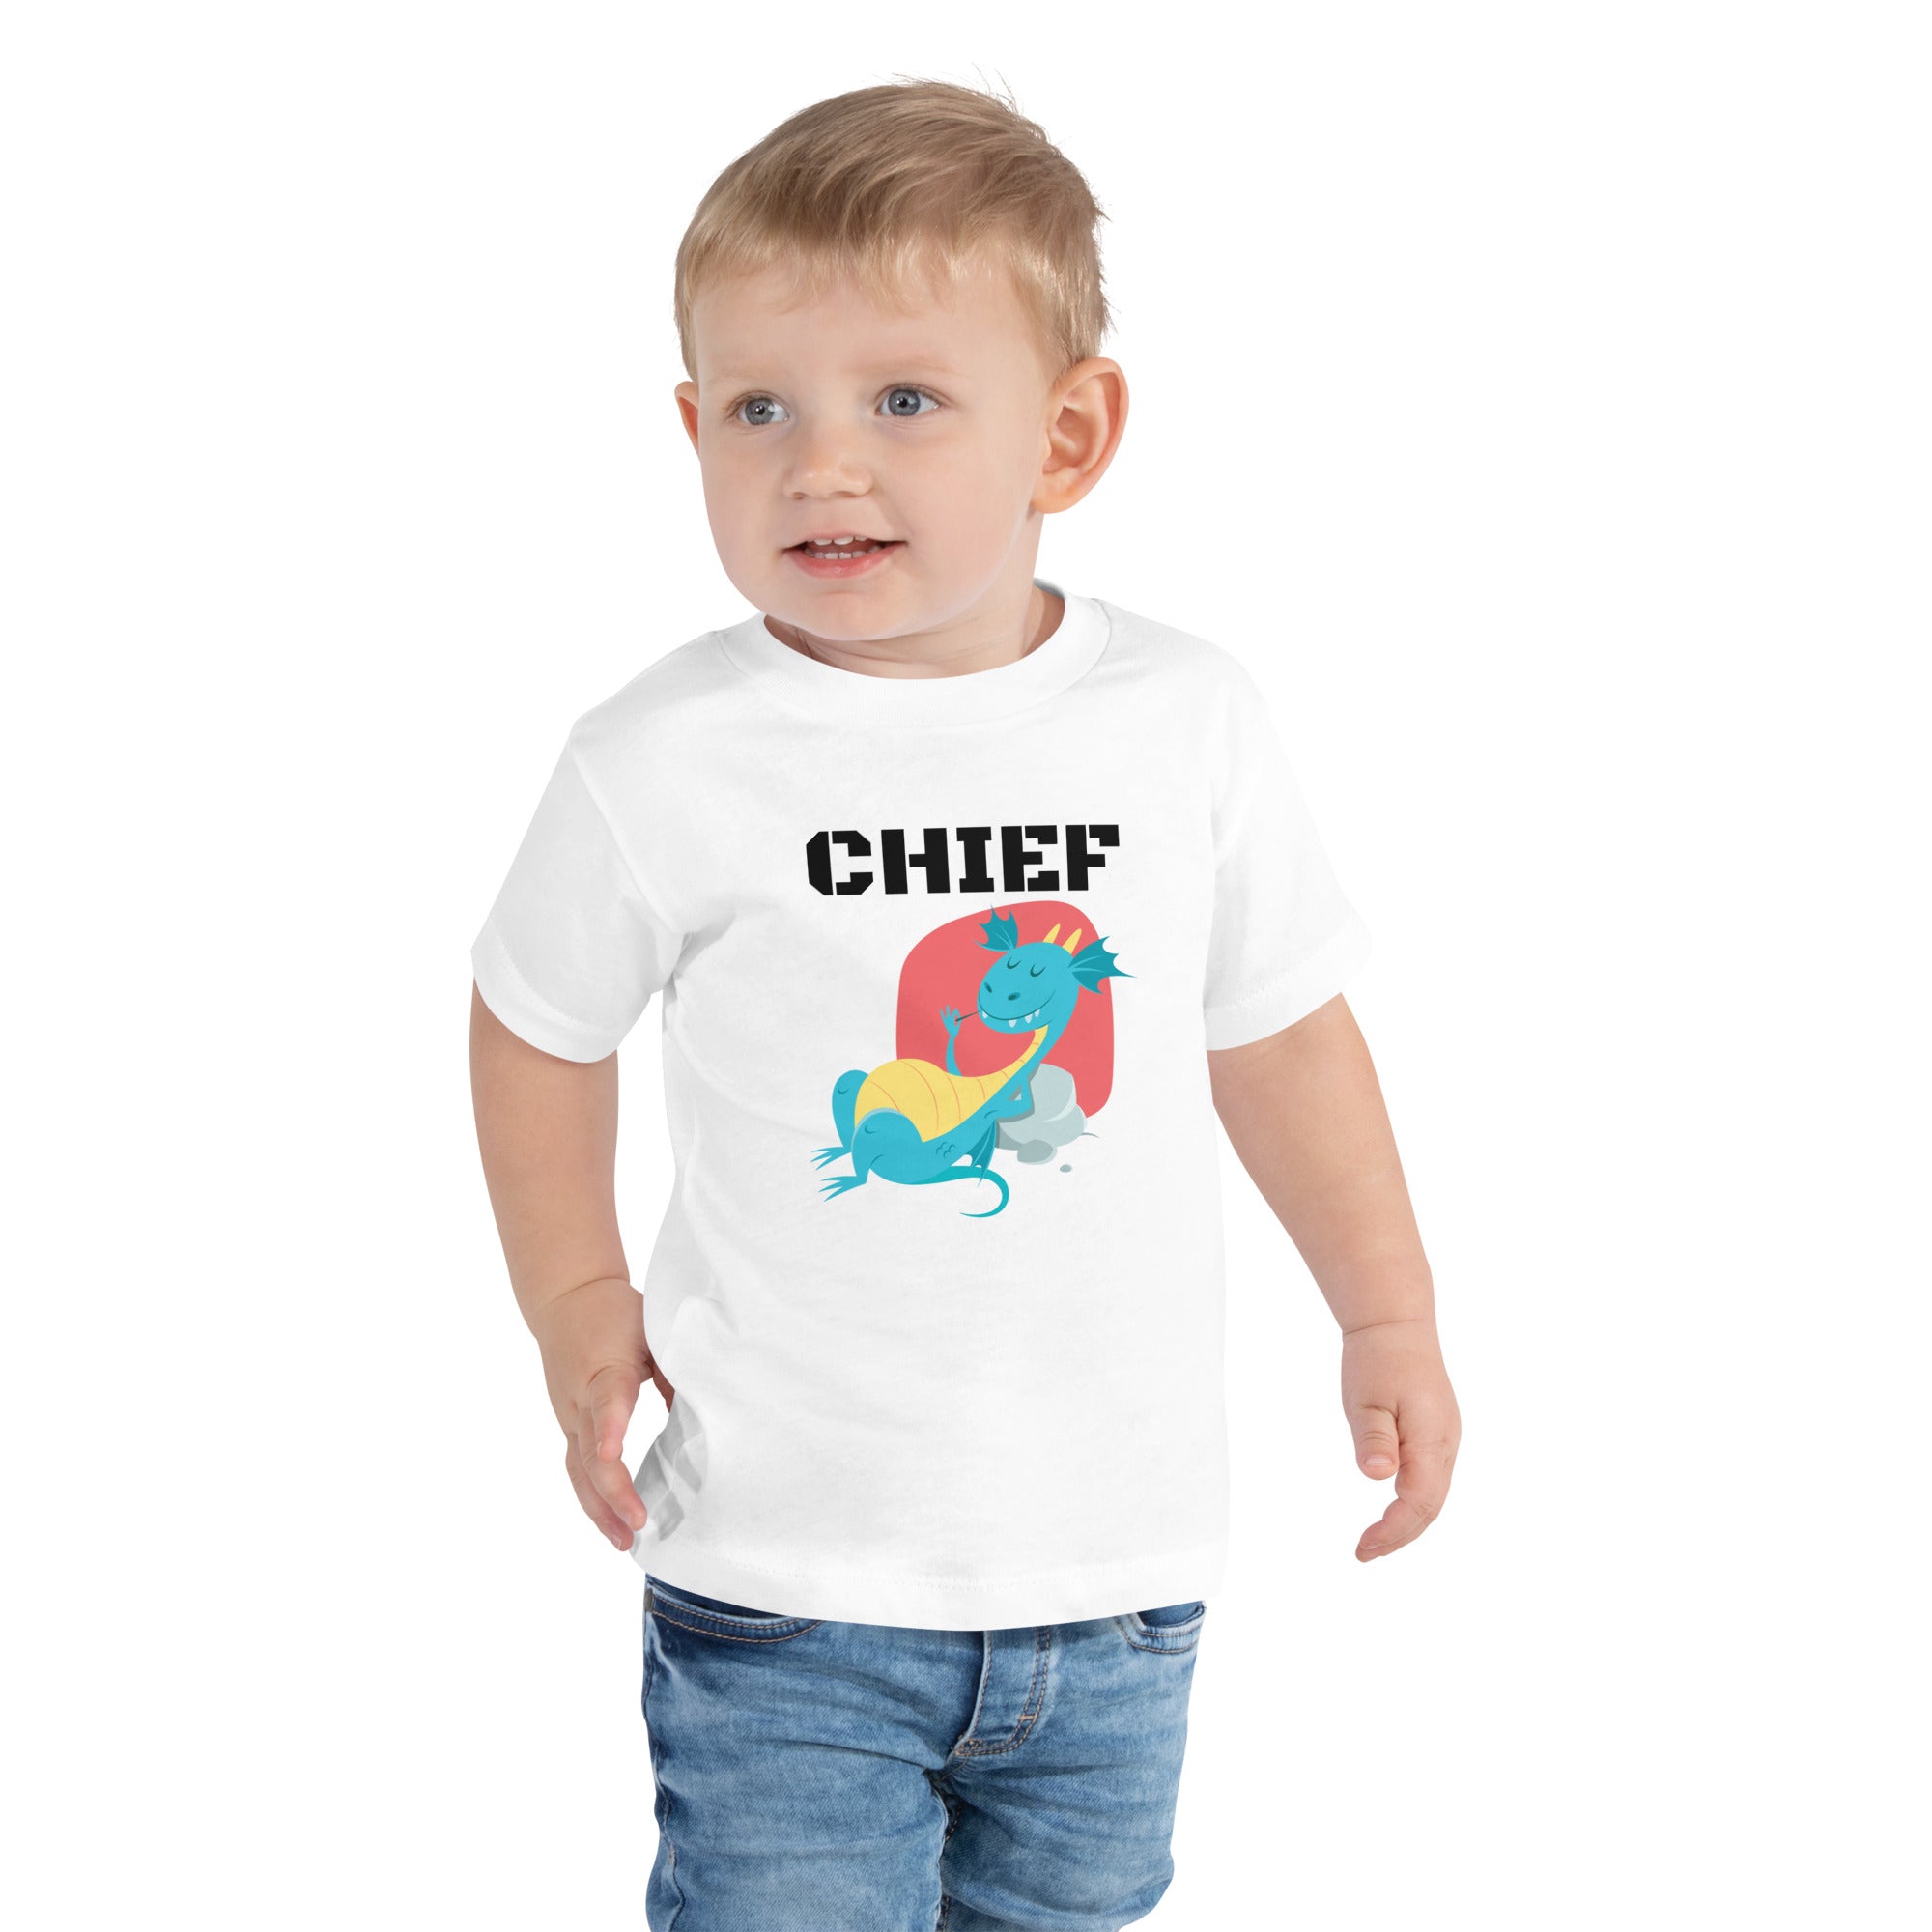 Chief Funny Toddler Short Sleeve Tee - kayzers